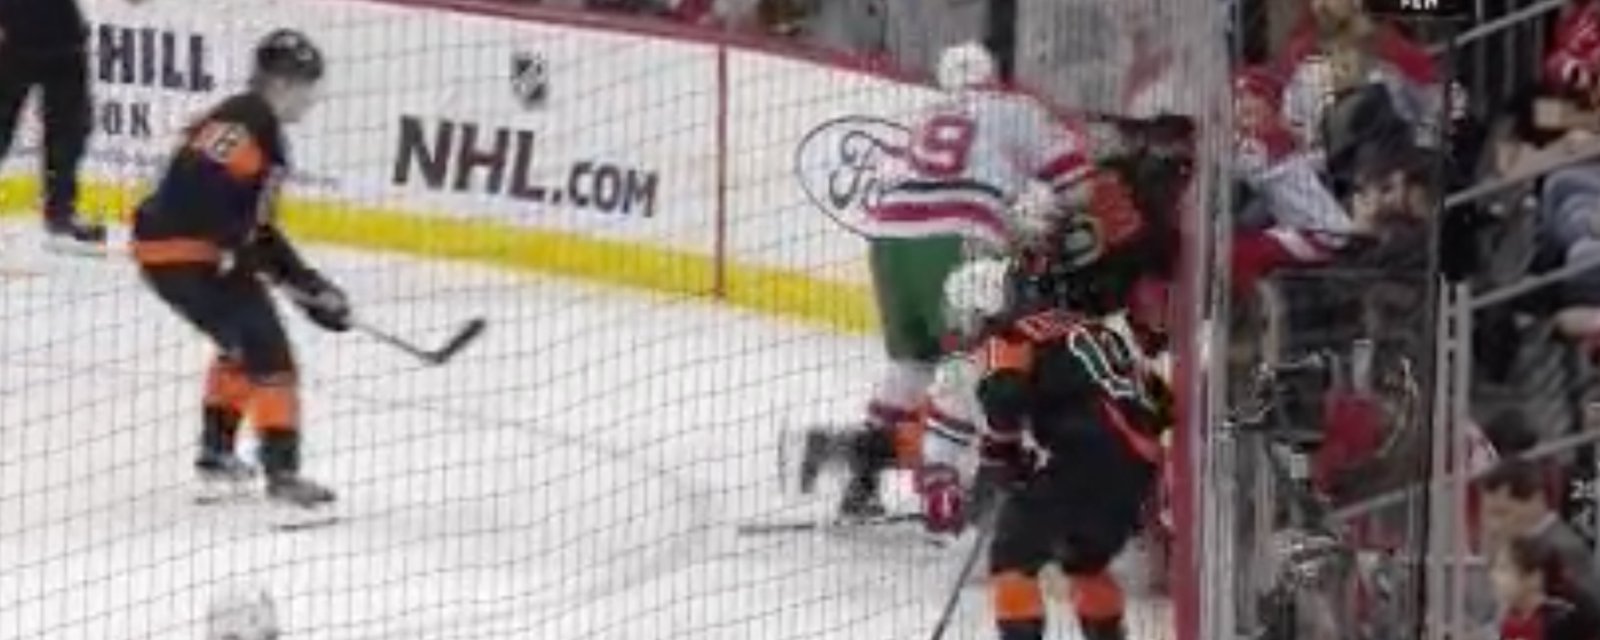 Breaking: Flyers' Patrick barely survives trash hit from behind! 